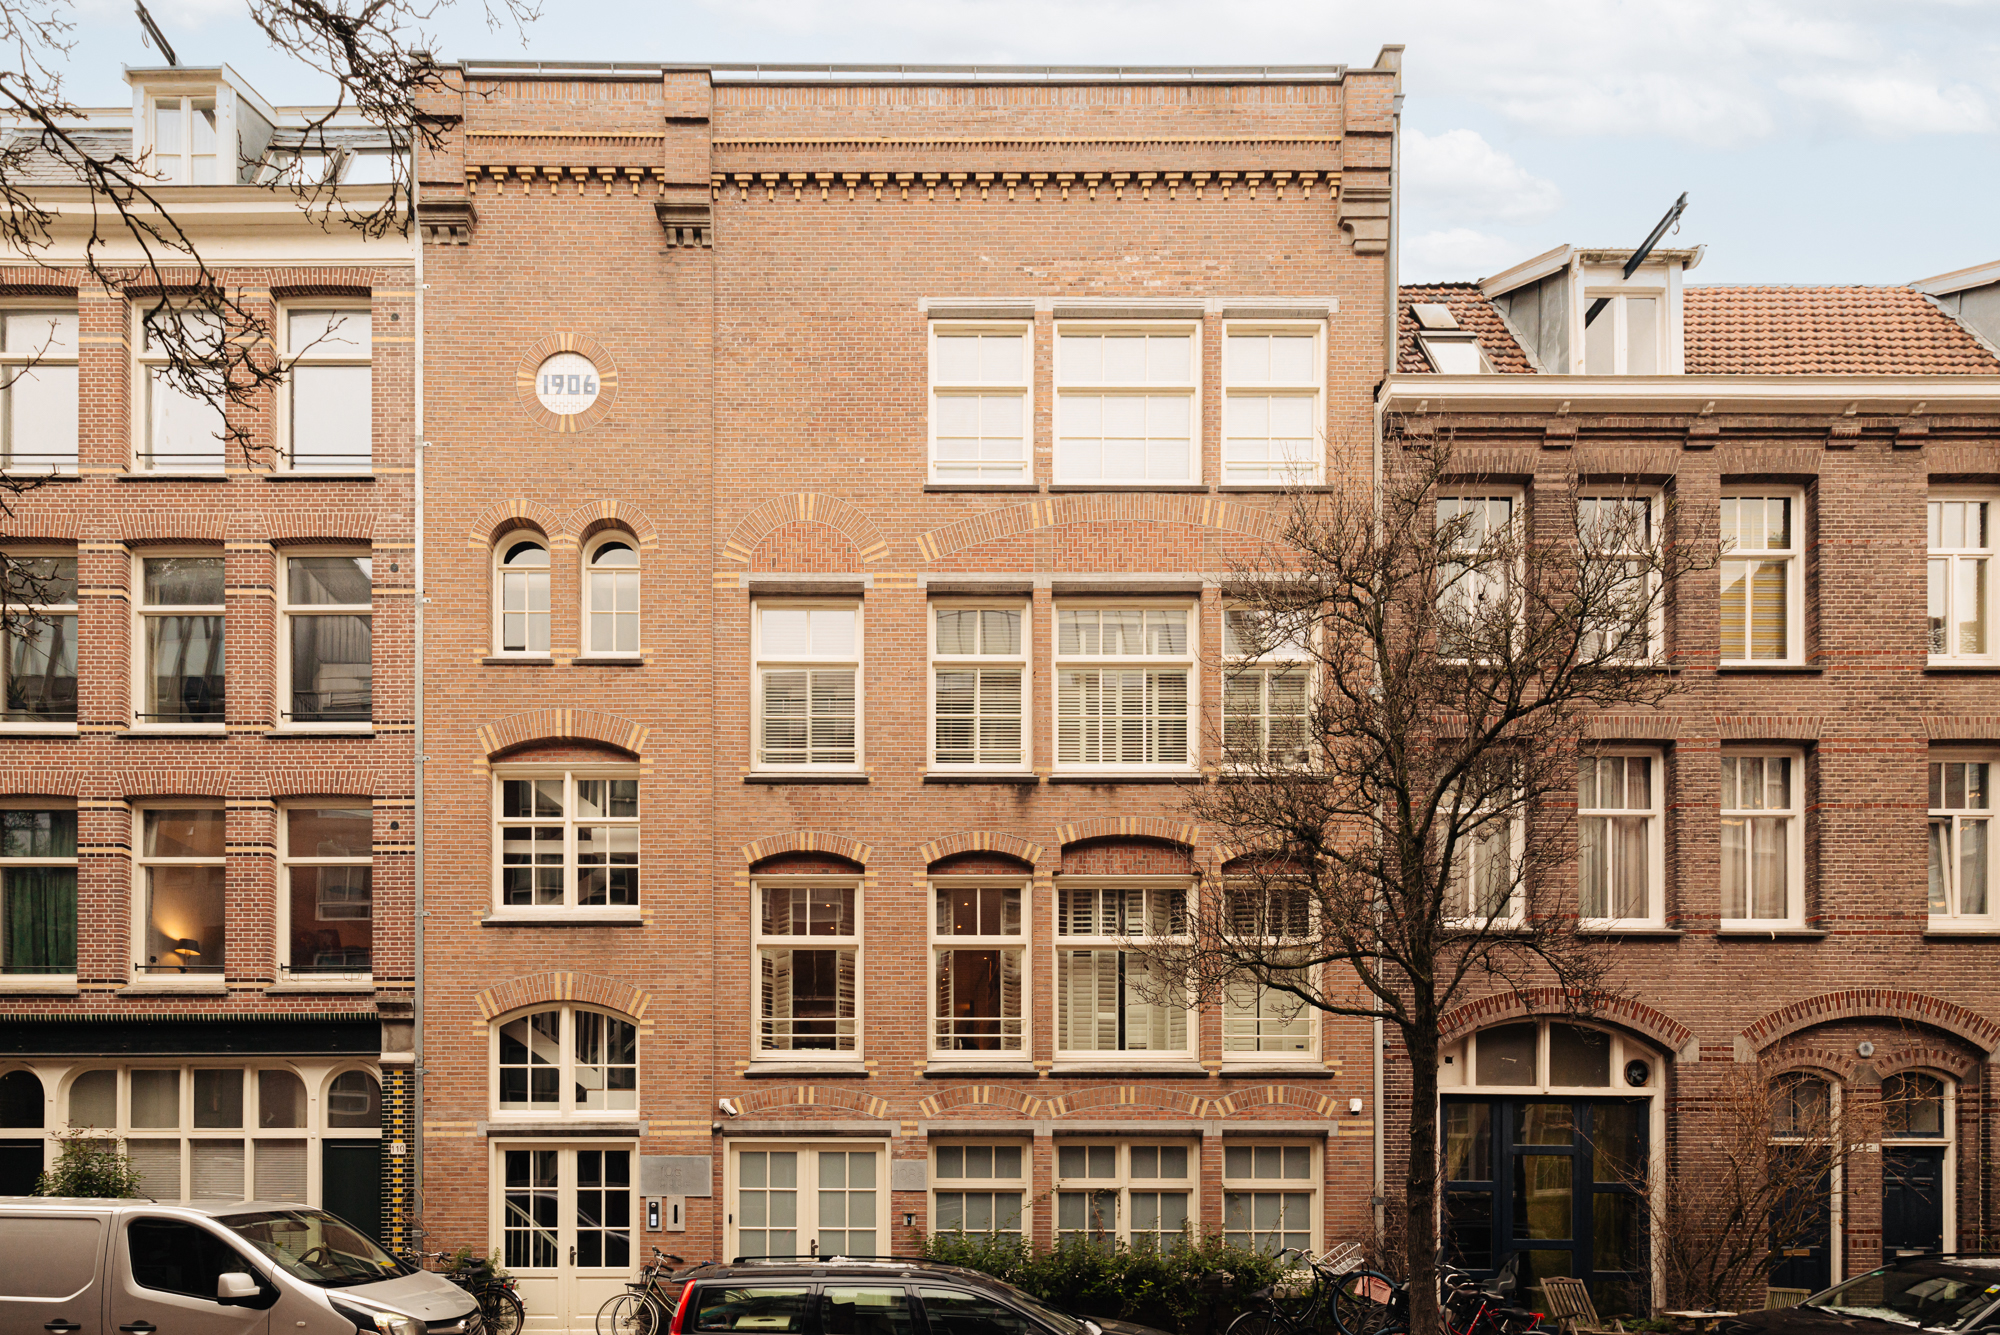 Luxurious double ground floor family apartment in chic Old-South Amsterdam